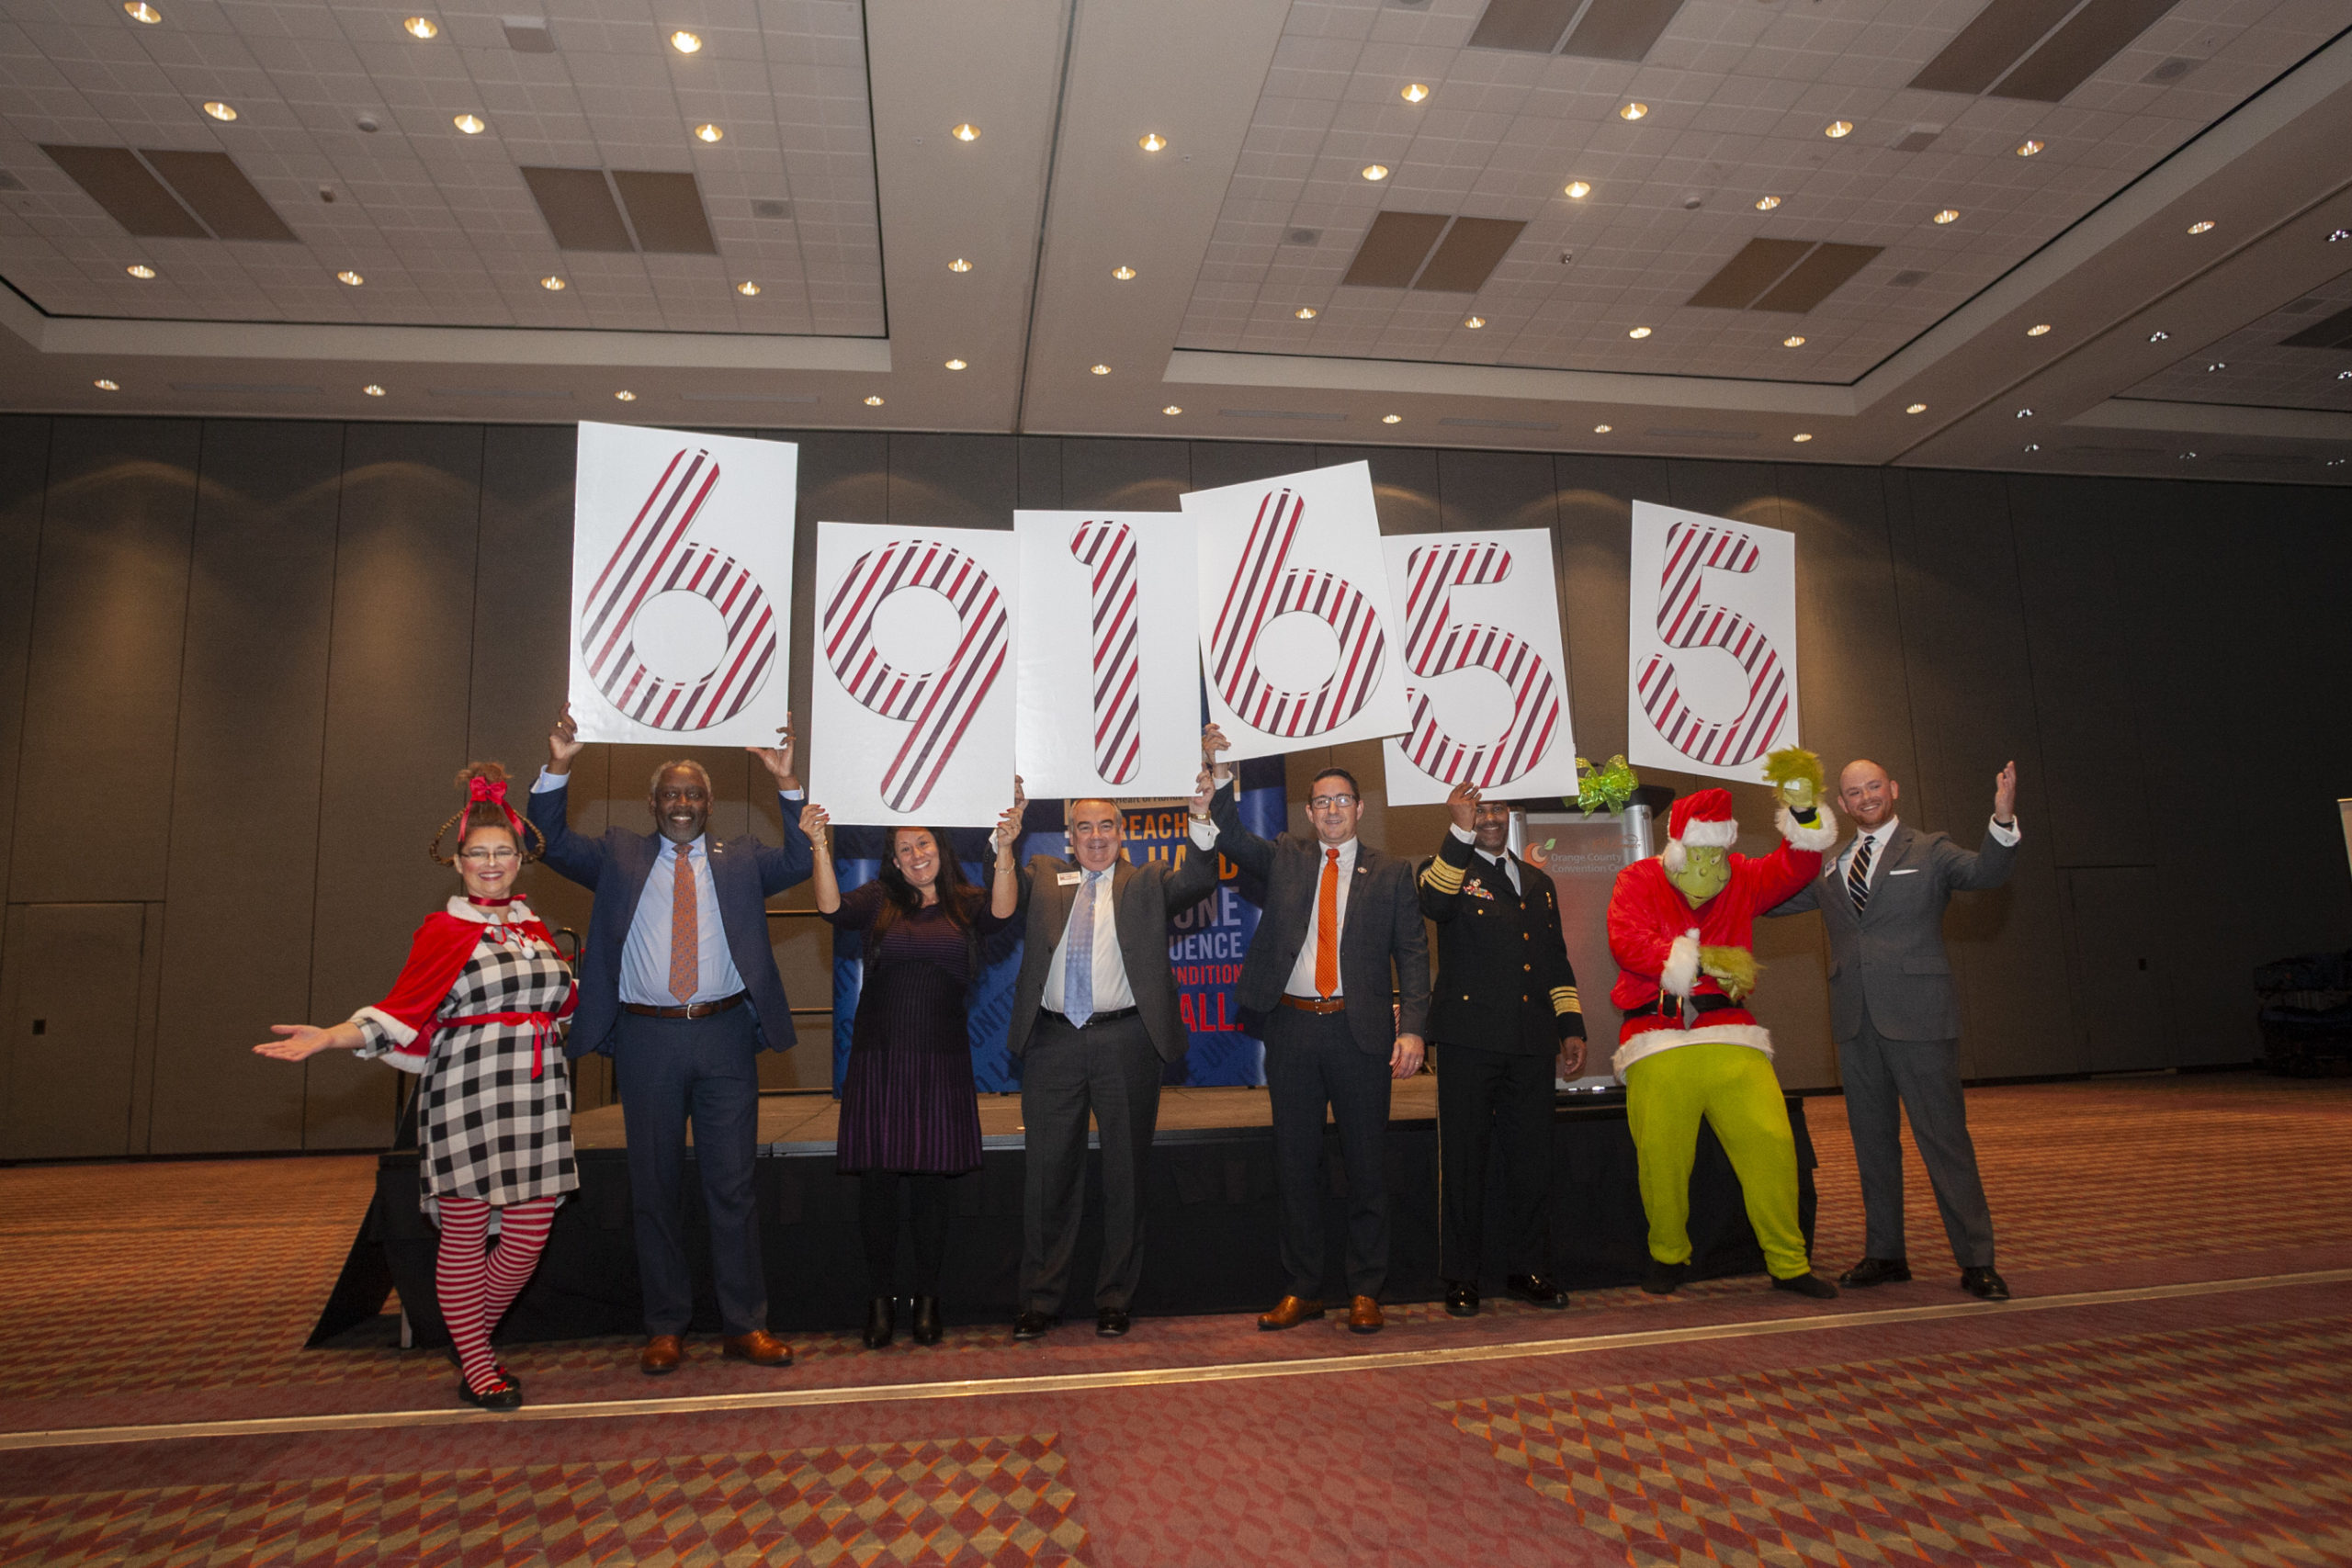 Business leaders holding signs with numbers on them representing a total number of fundraising dollars